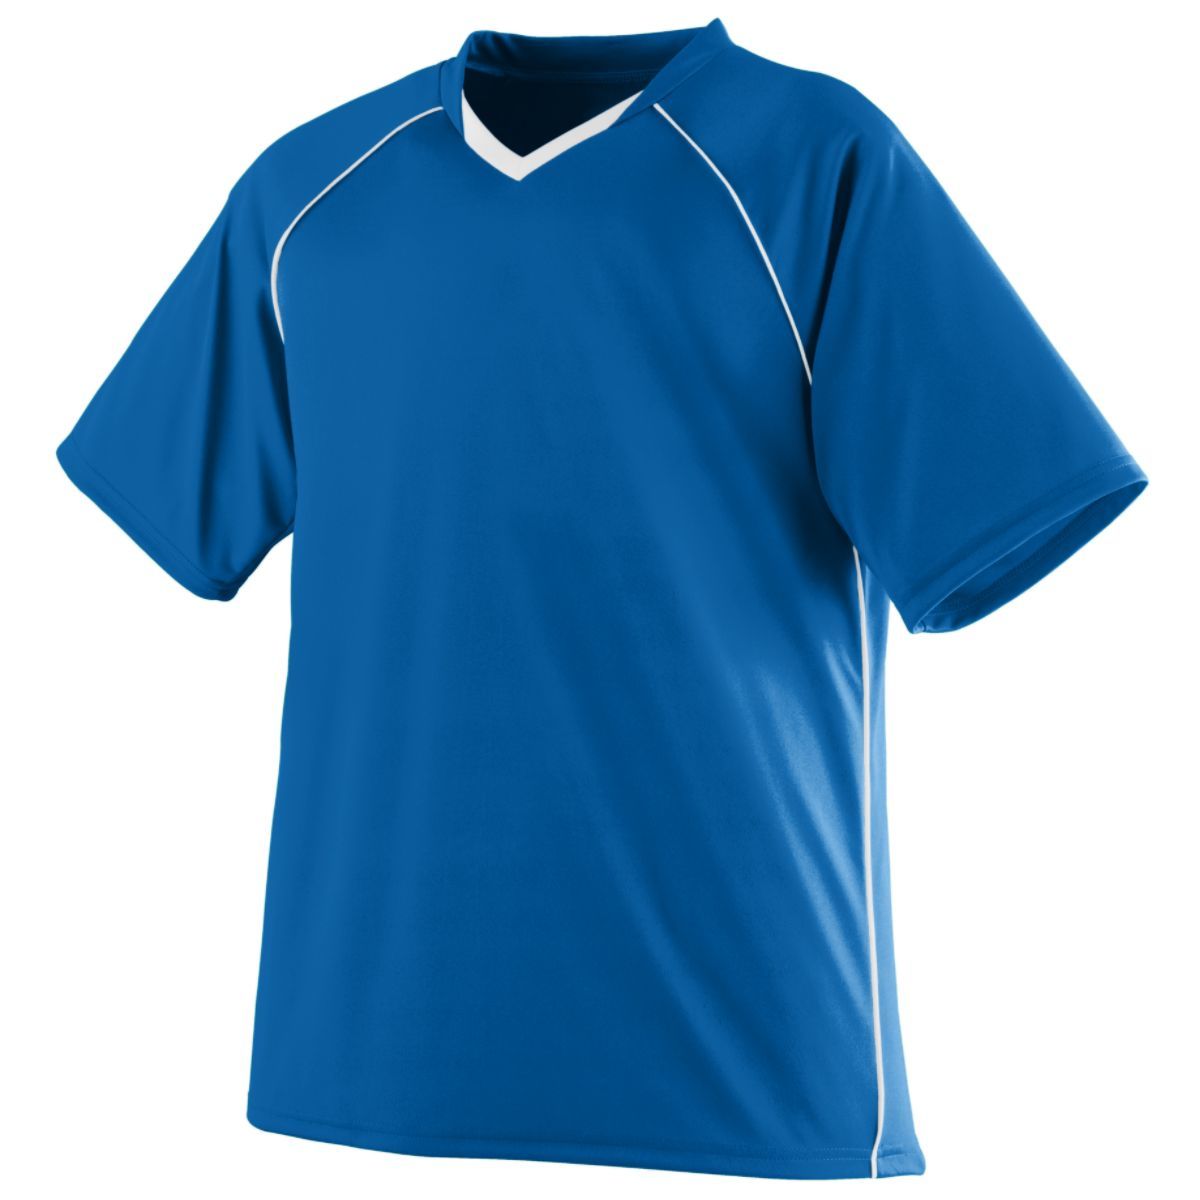 Augusta Sportswear Youth Striker Jersey in Royal/White  -Part of the Youth, Youth-Jersey, Augusta-Products, Soccer, Shirts, All-Sports-1 product lines at KanaleyCreations.com